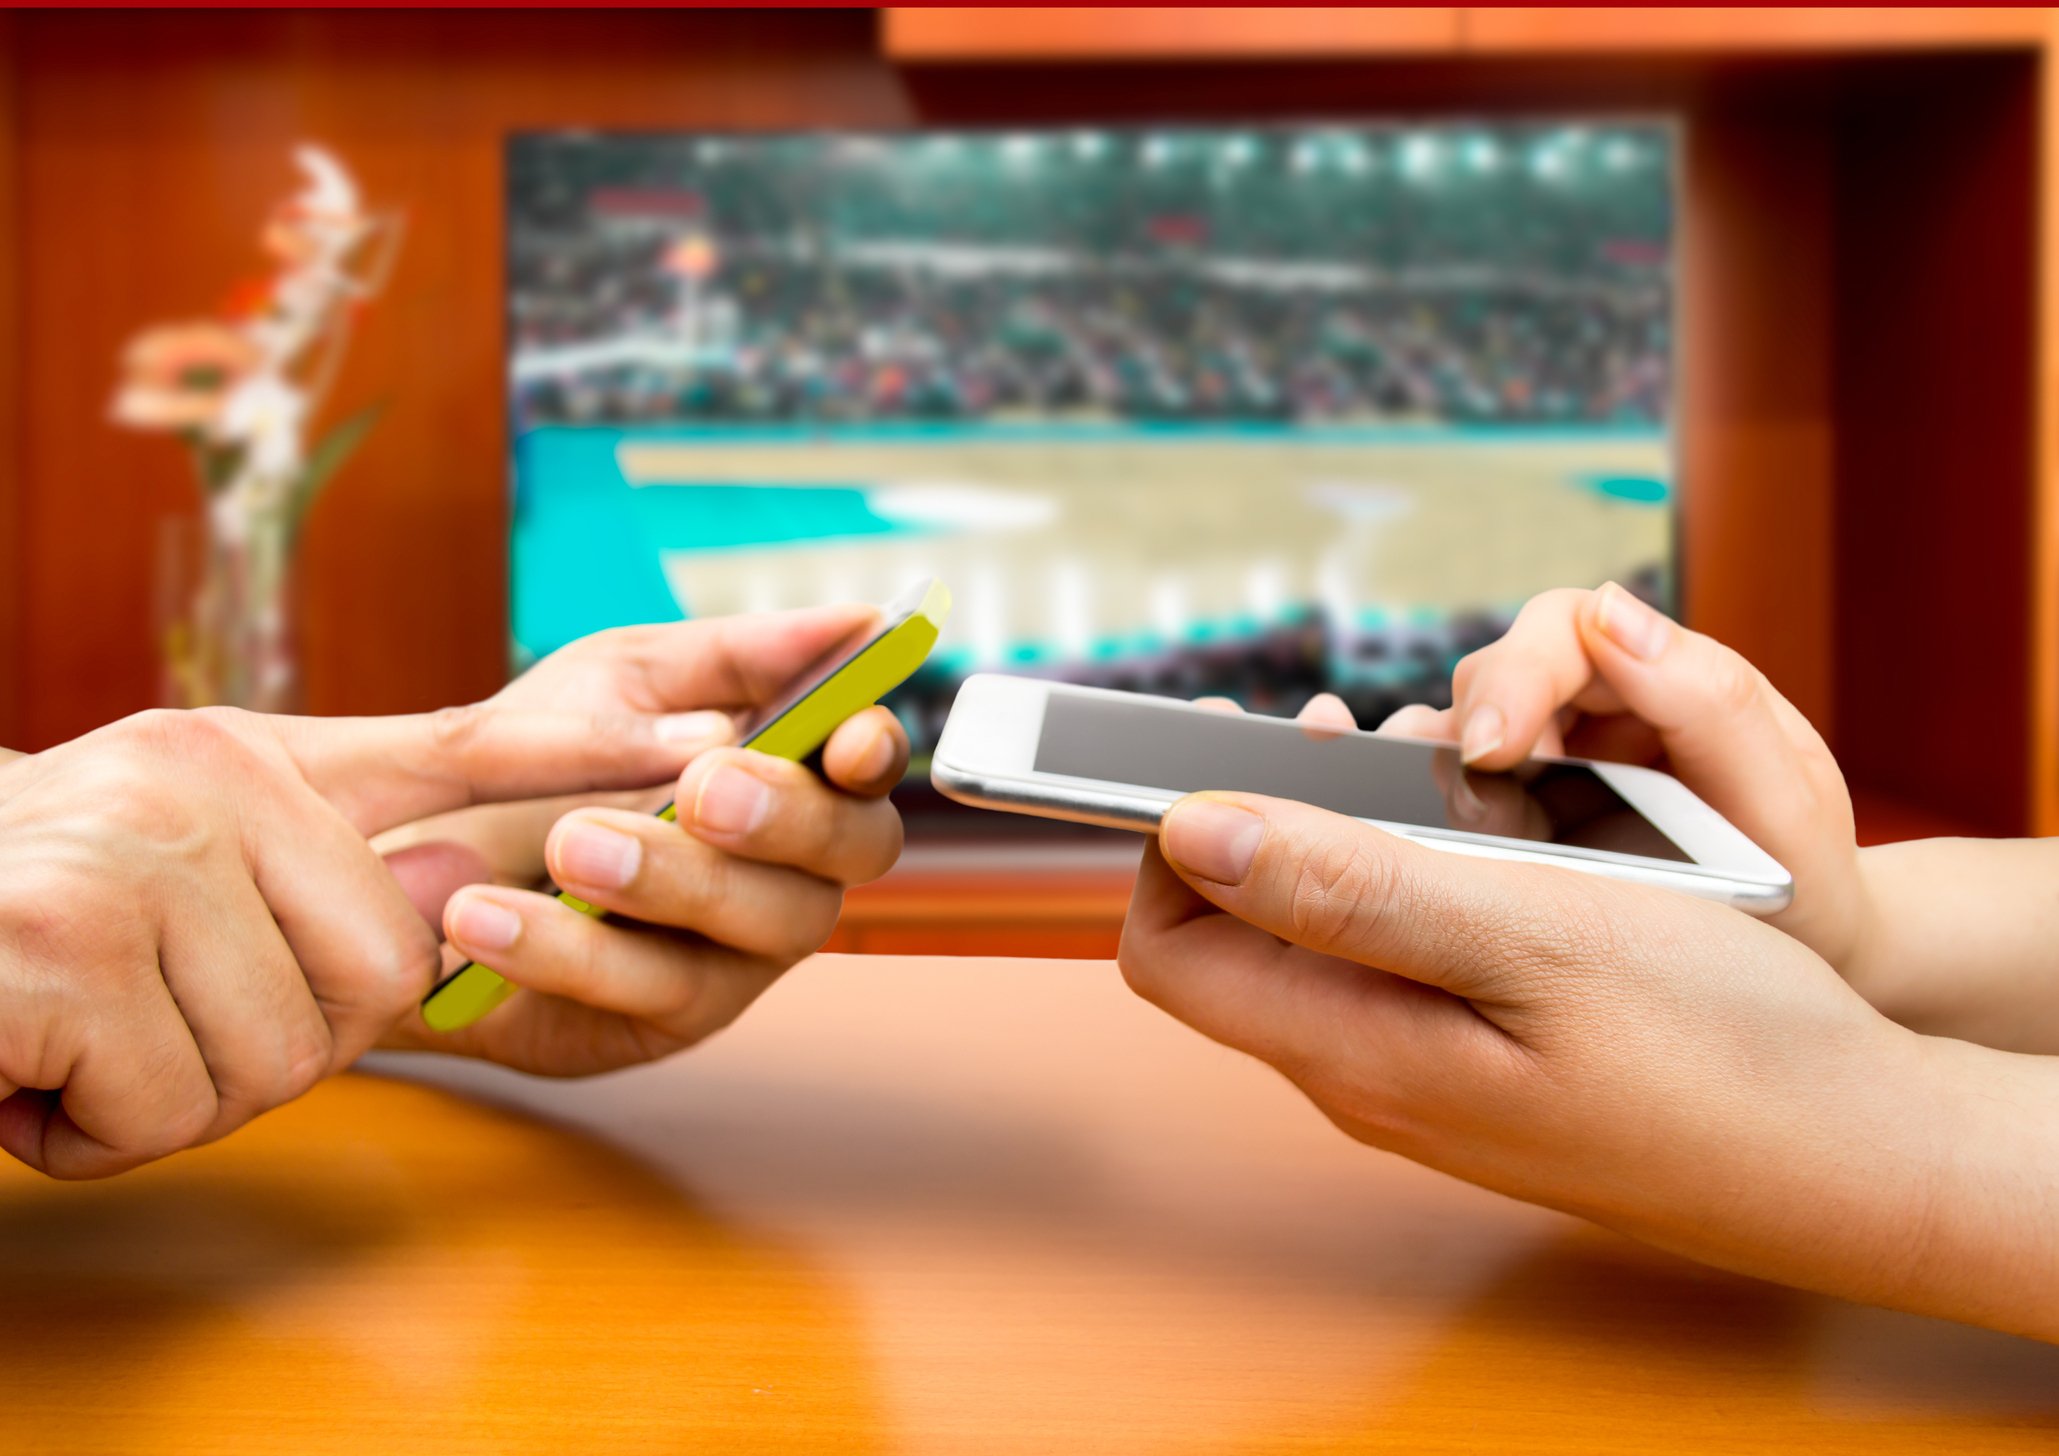 Two smartphones in front of TV with basketball on it